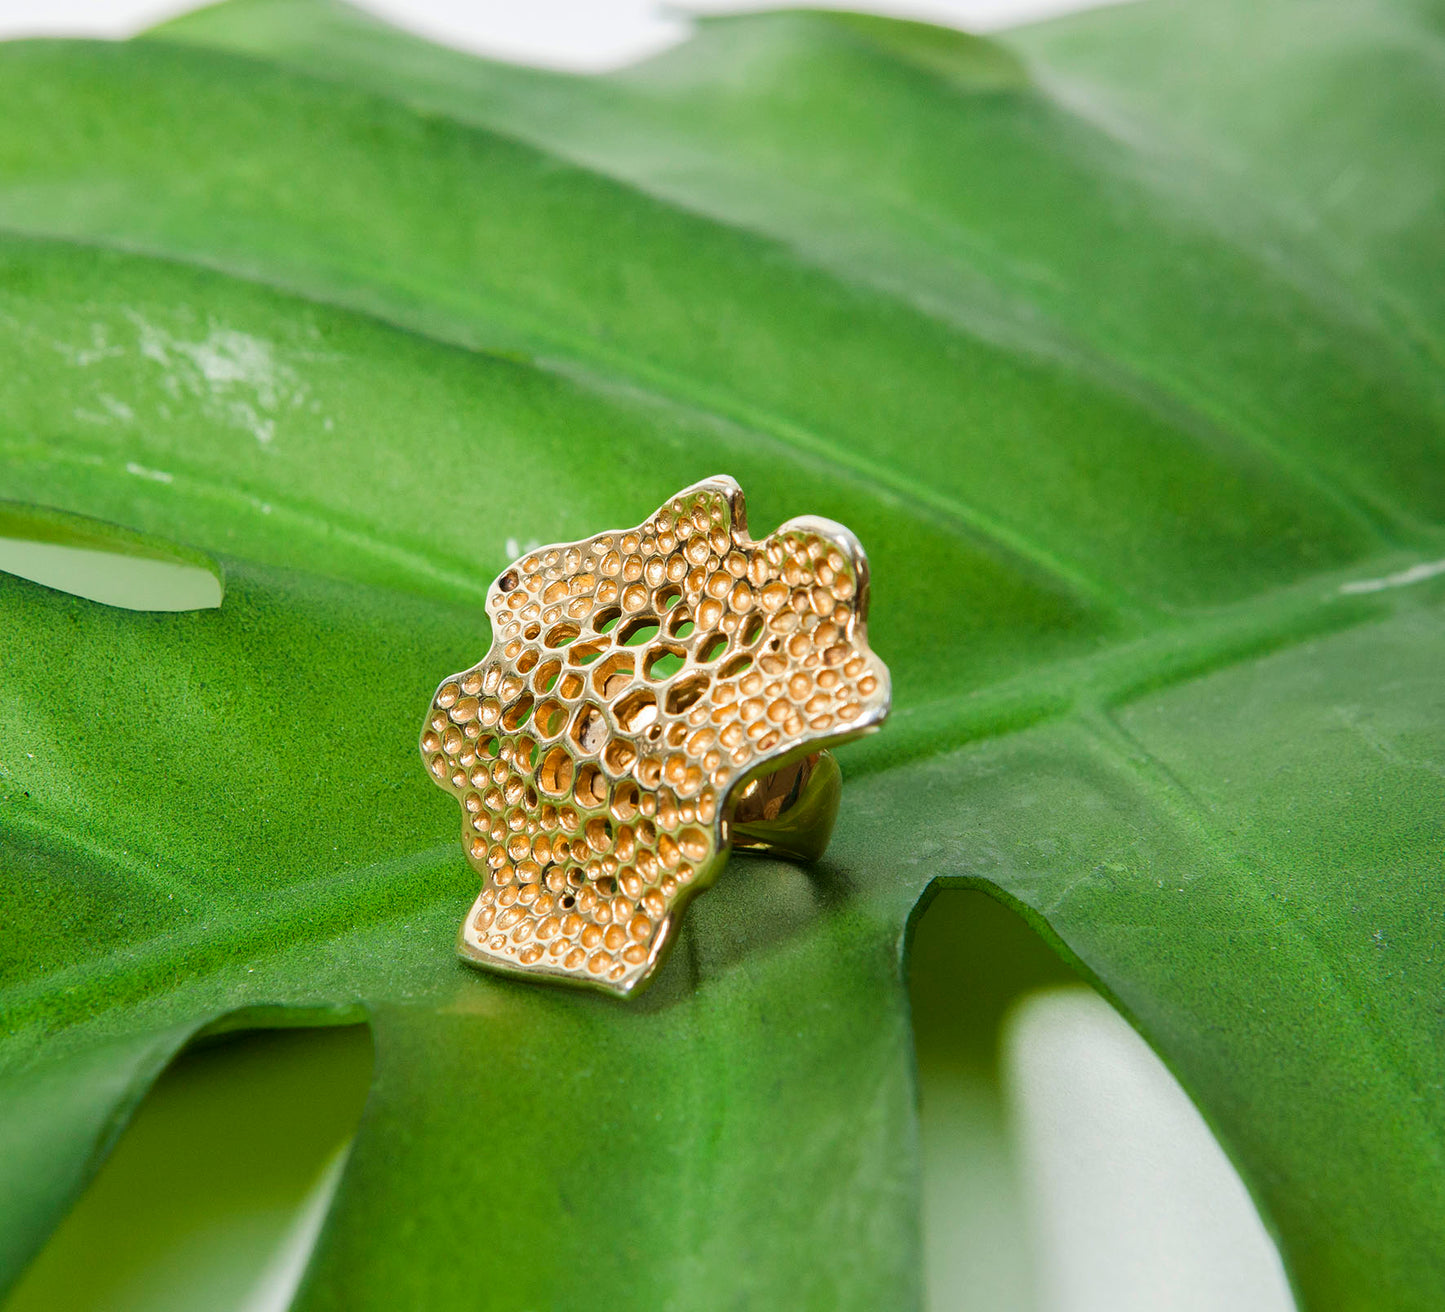 Labyrinth Wave Gold Statement Ring